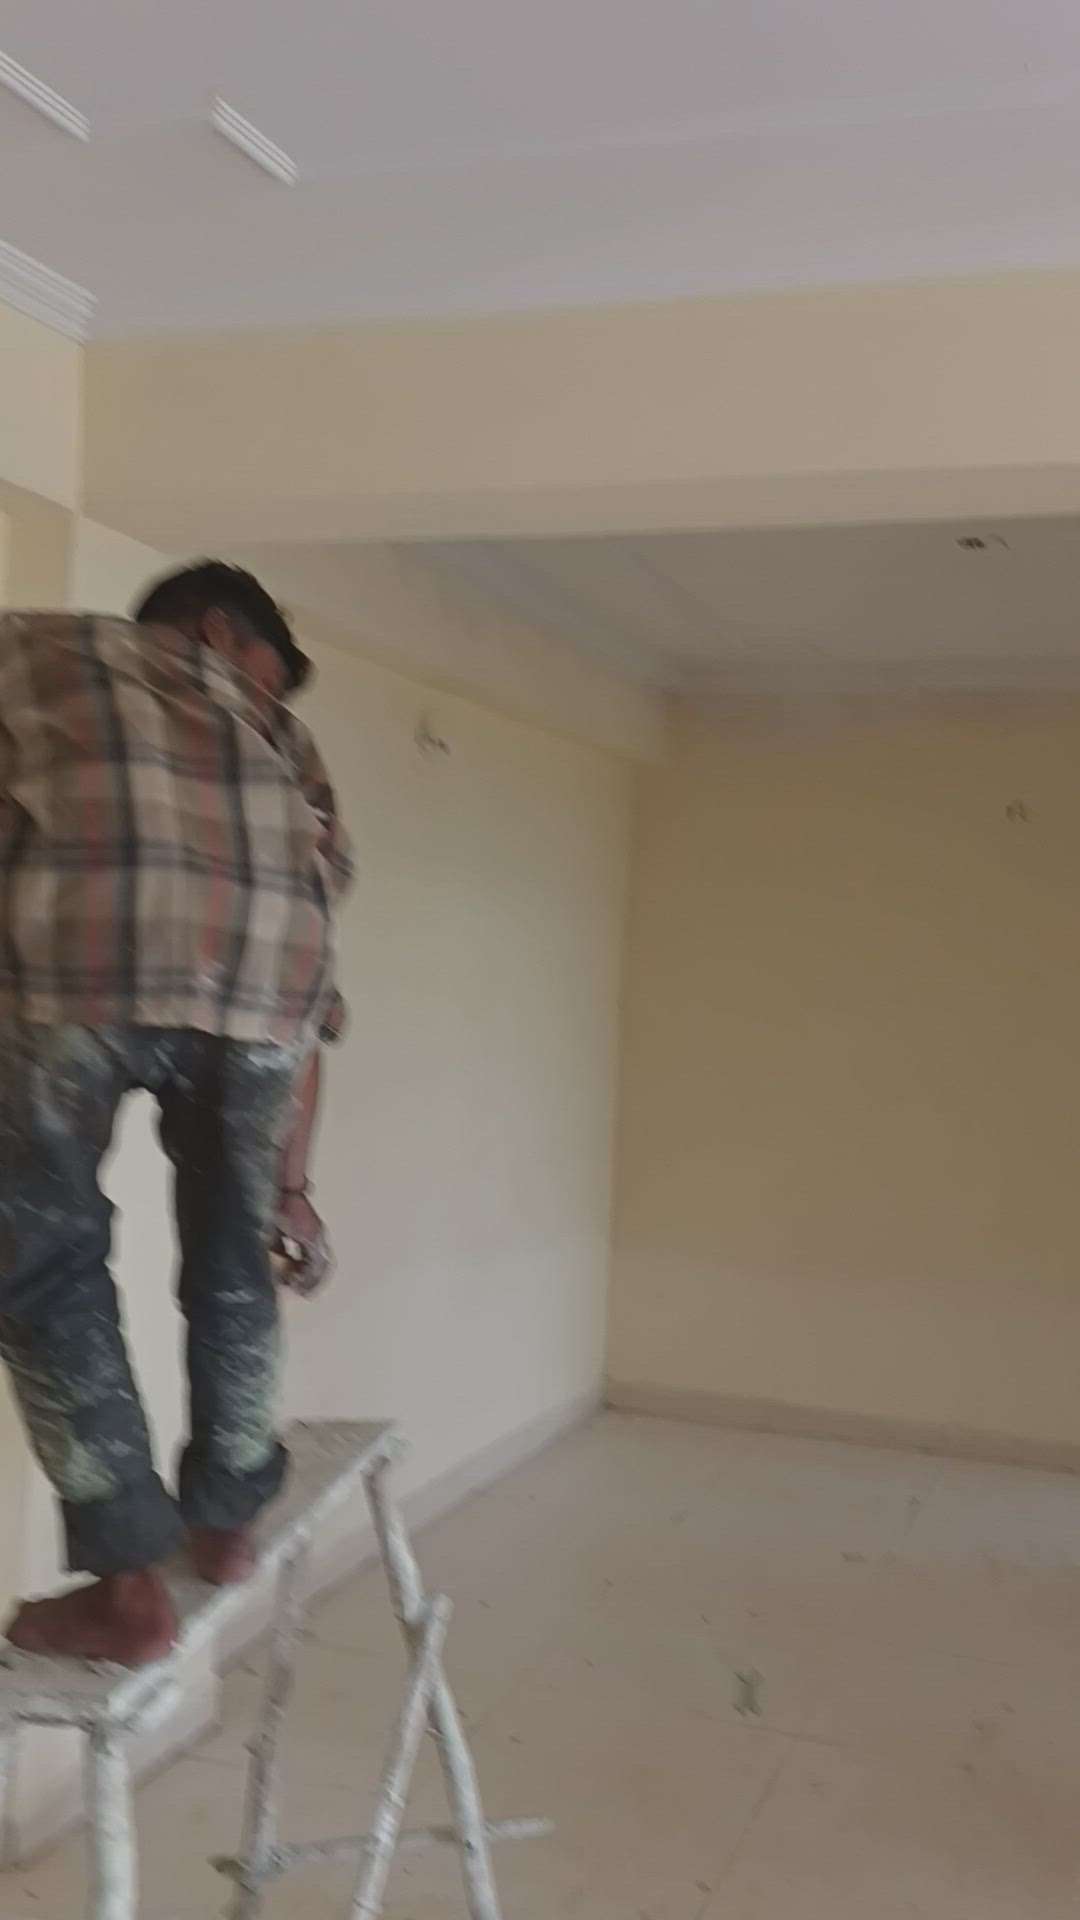 # House Painting Work 🖼 
call me 97998 49862  #